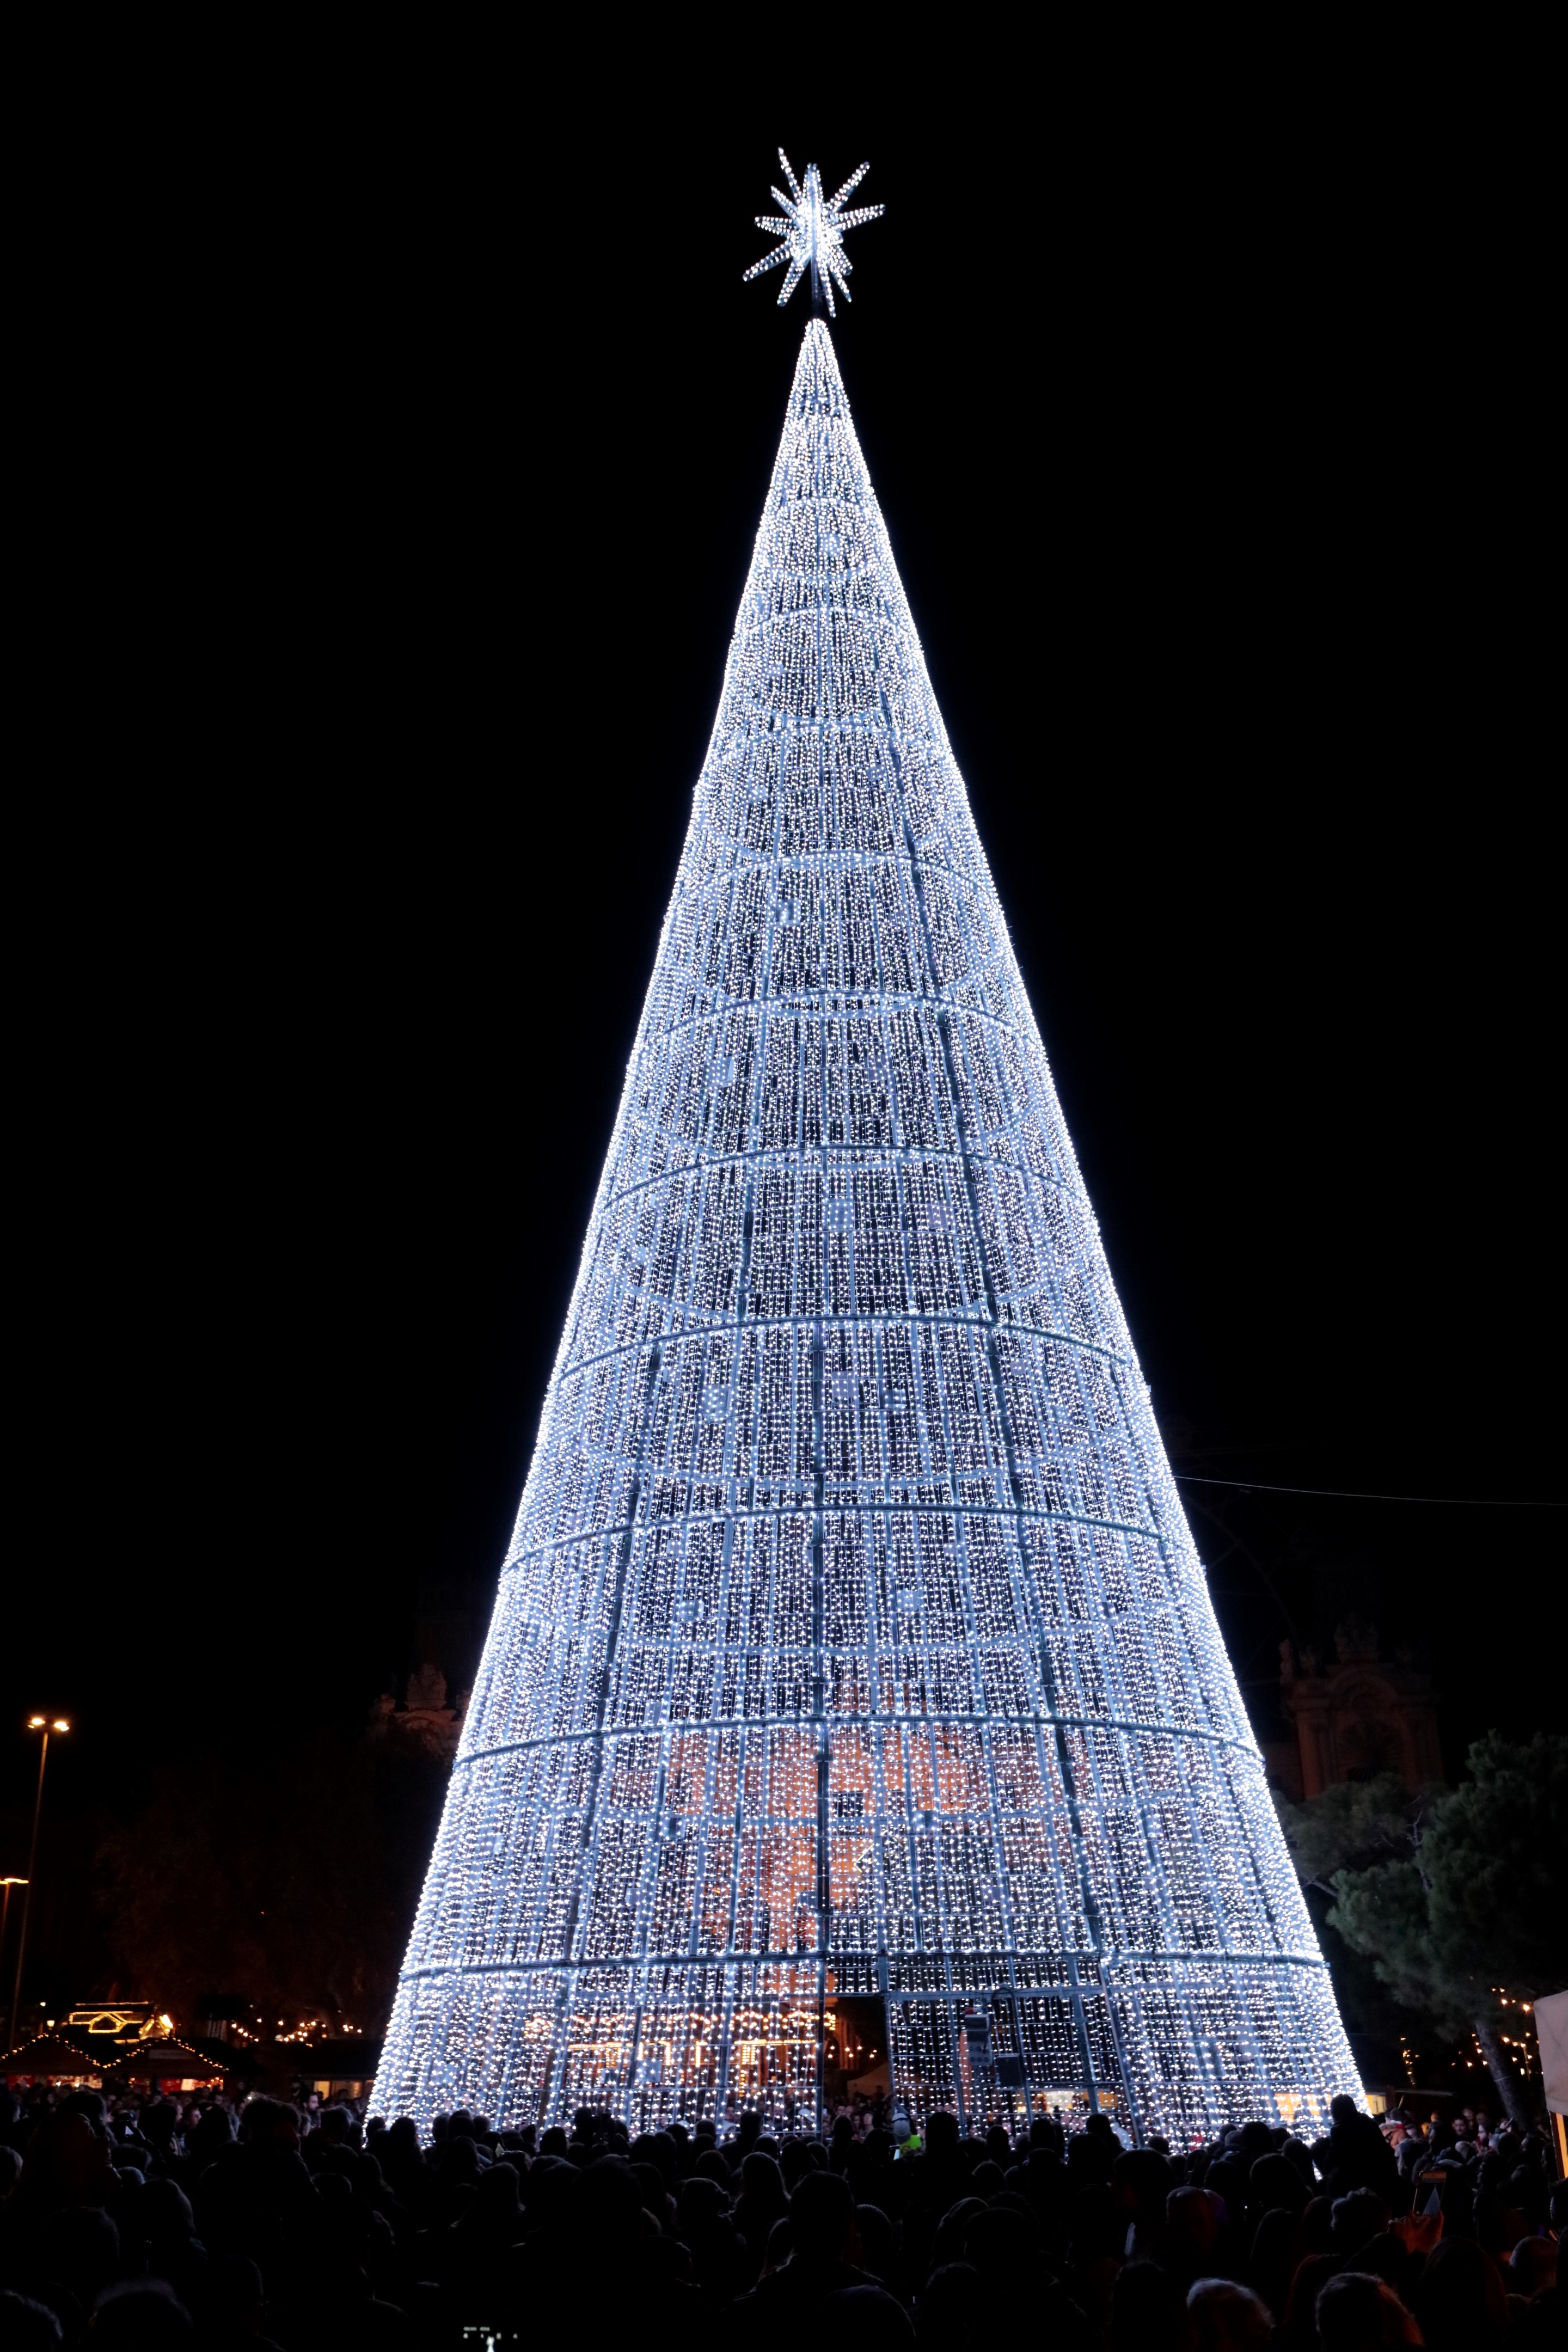 The 31 meters Christmas tree in Barcelona (by Port Vell)